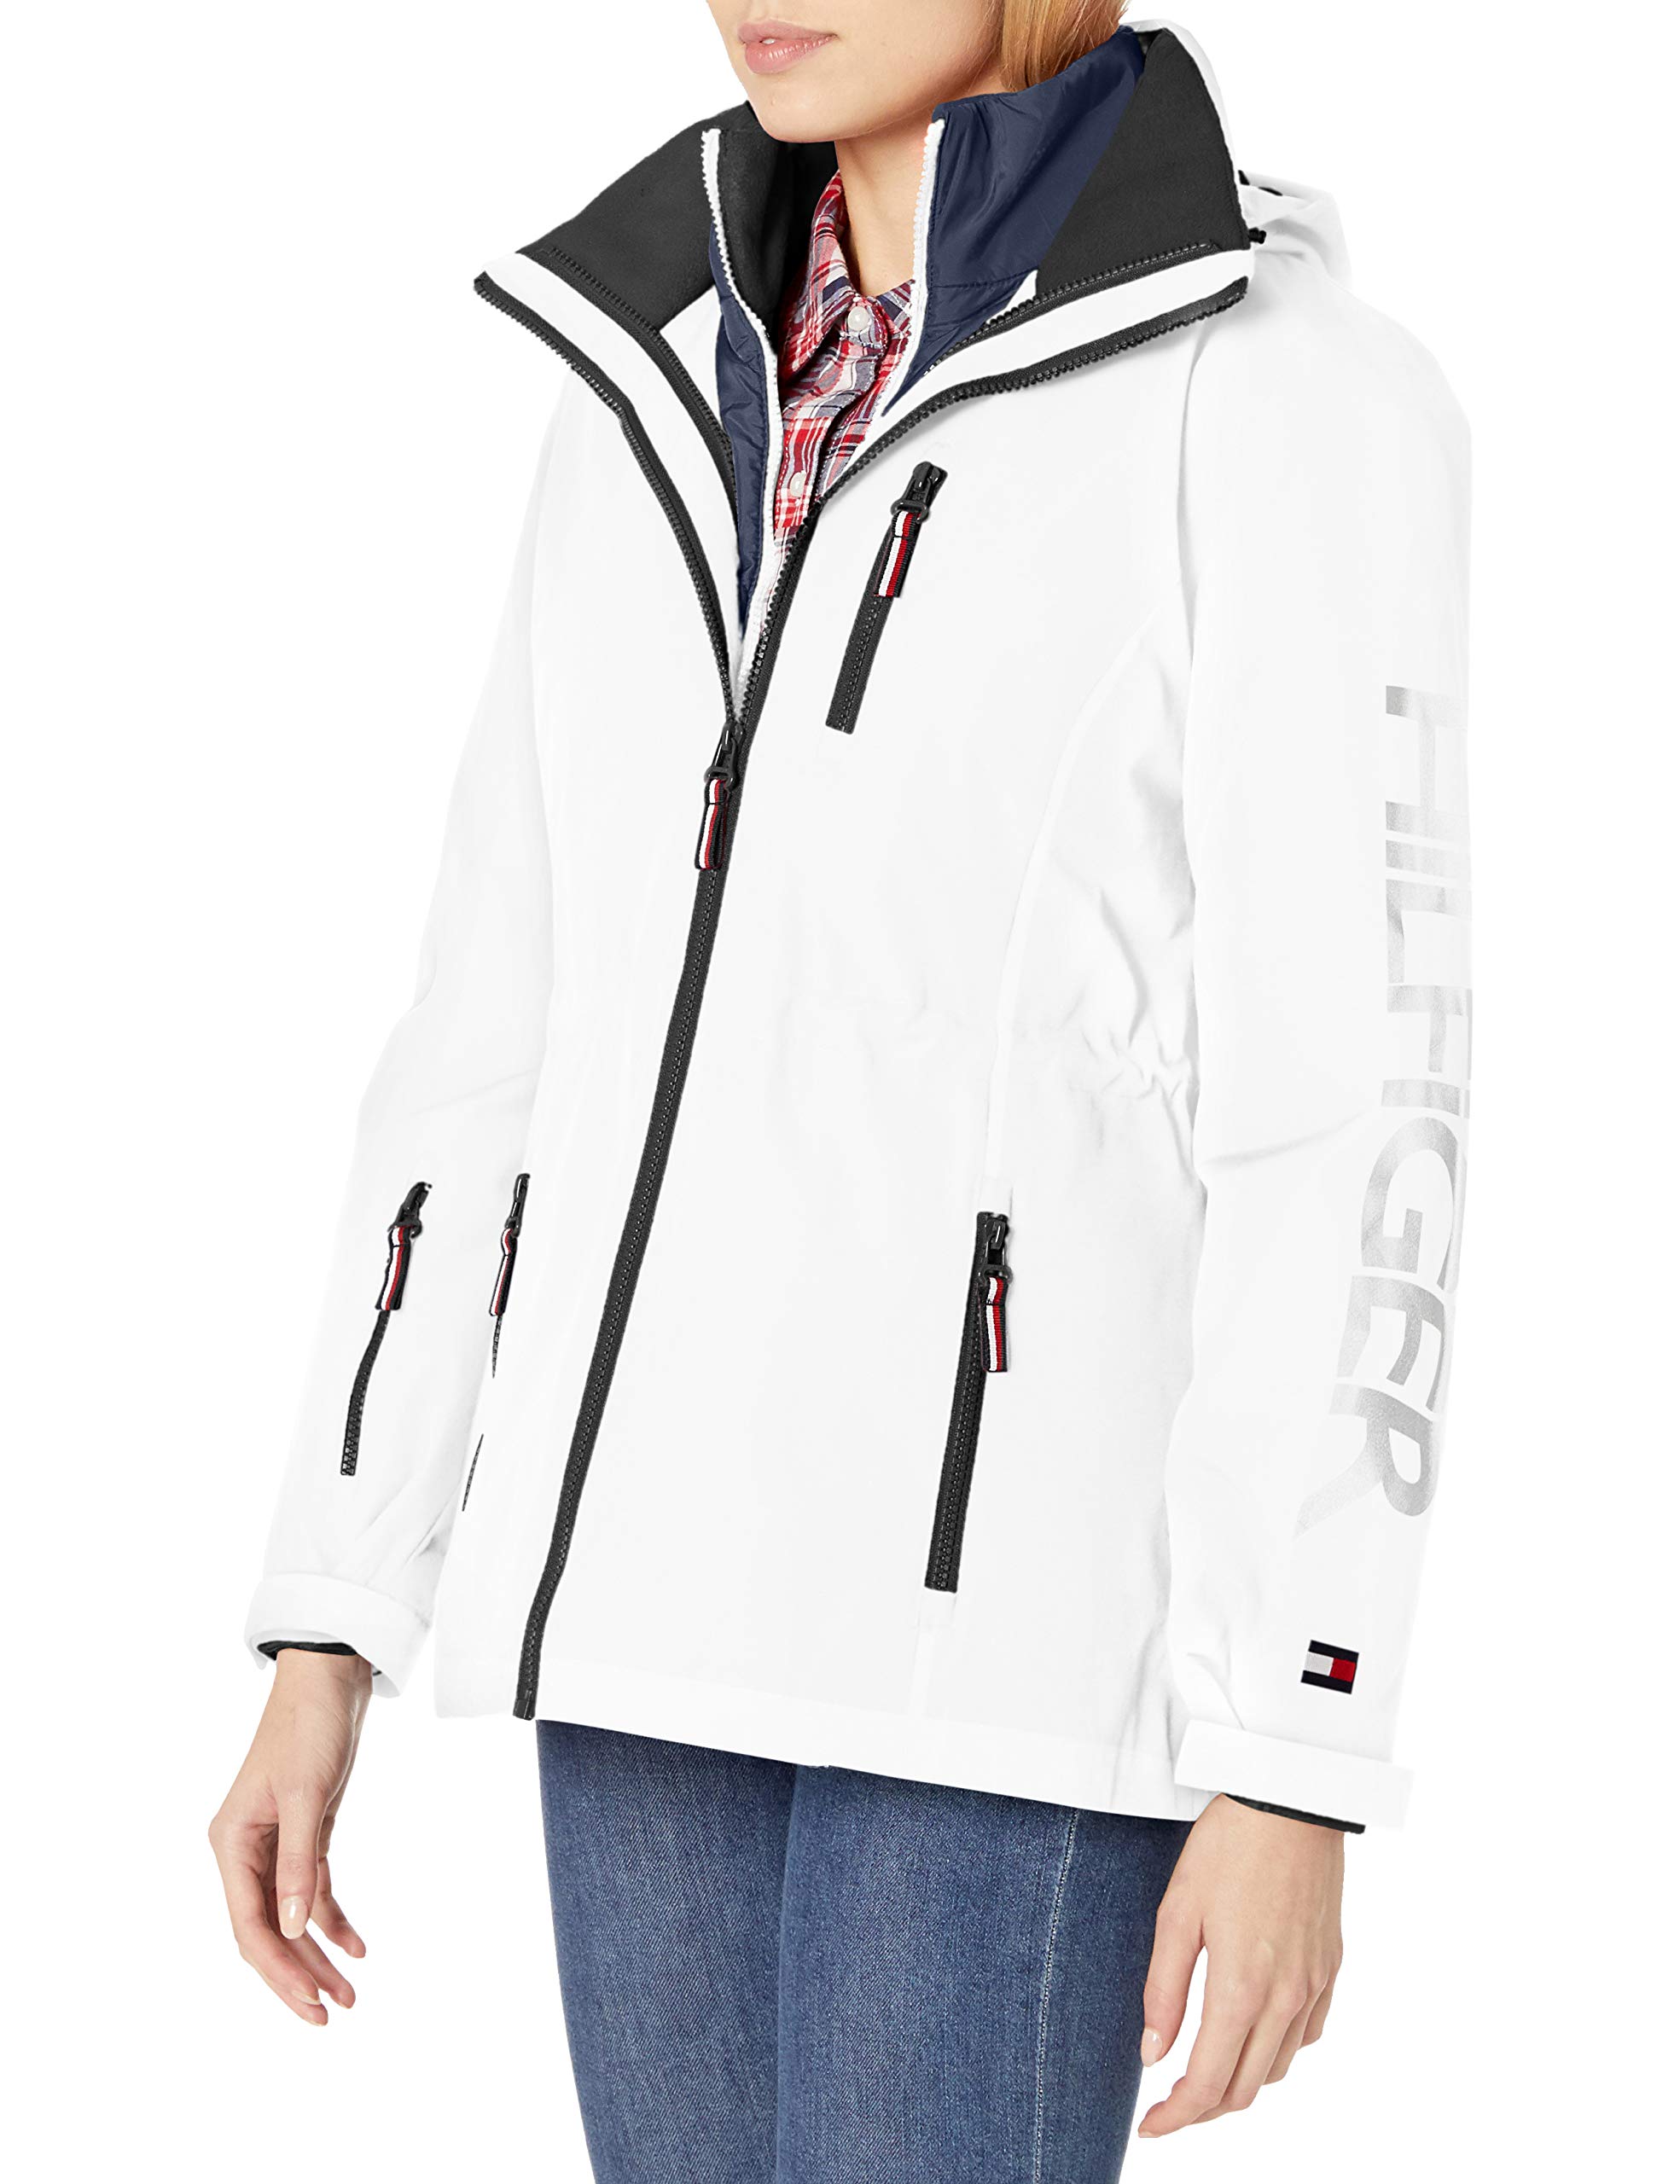 Tommy Hilfiger Women's 3-in-1 Multi Insulated Jacket, Removable Hoodie